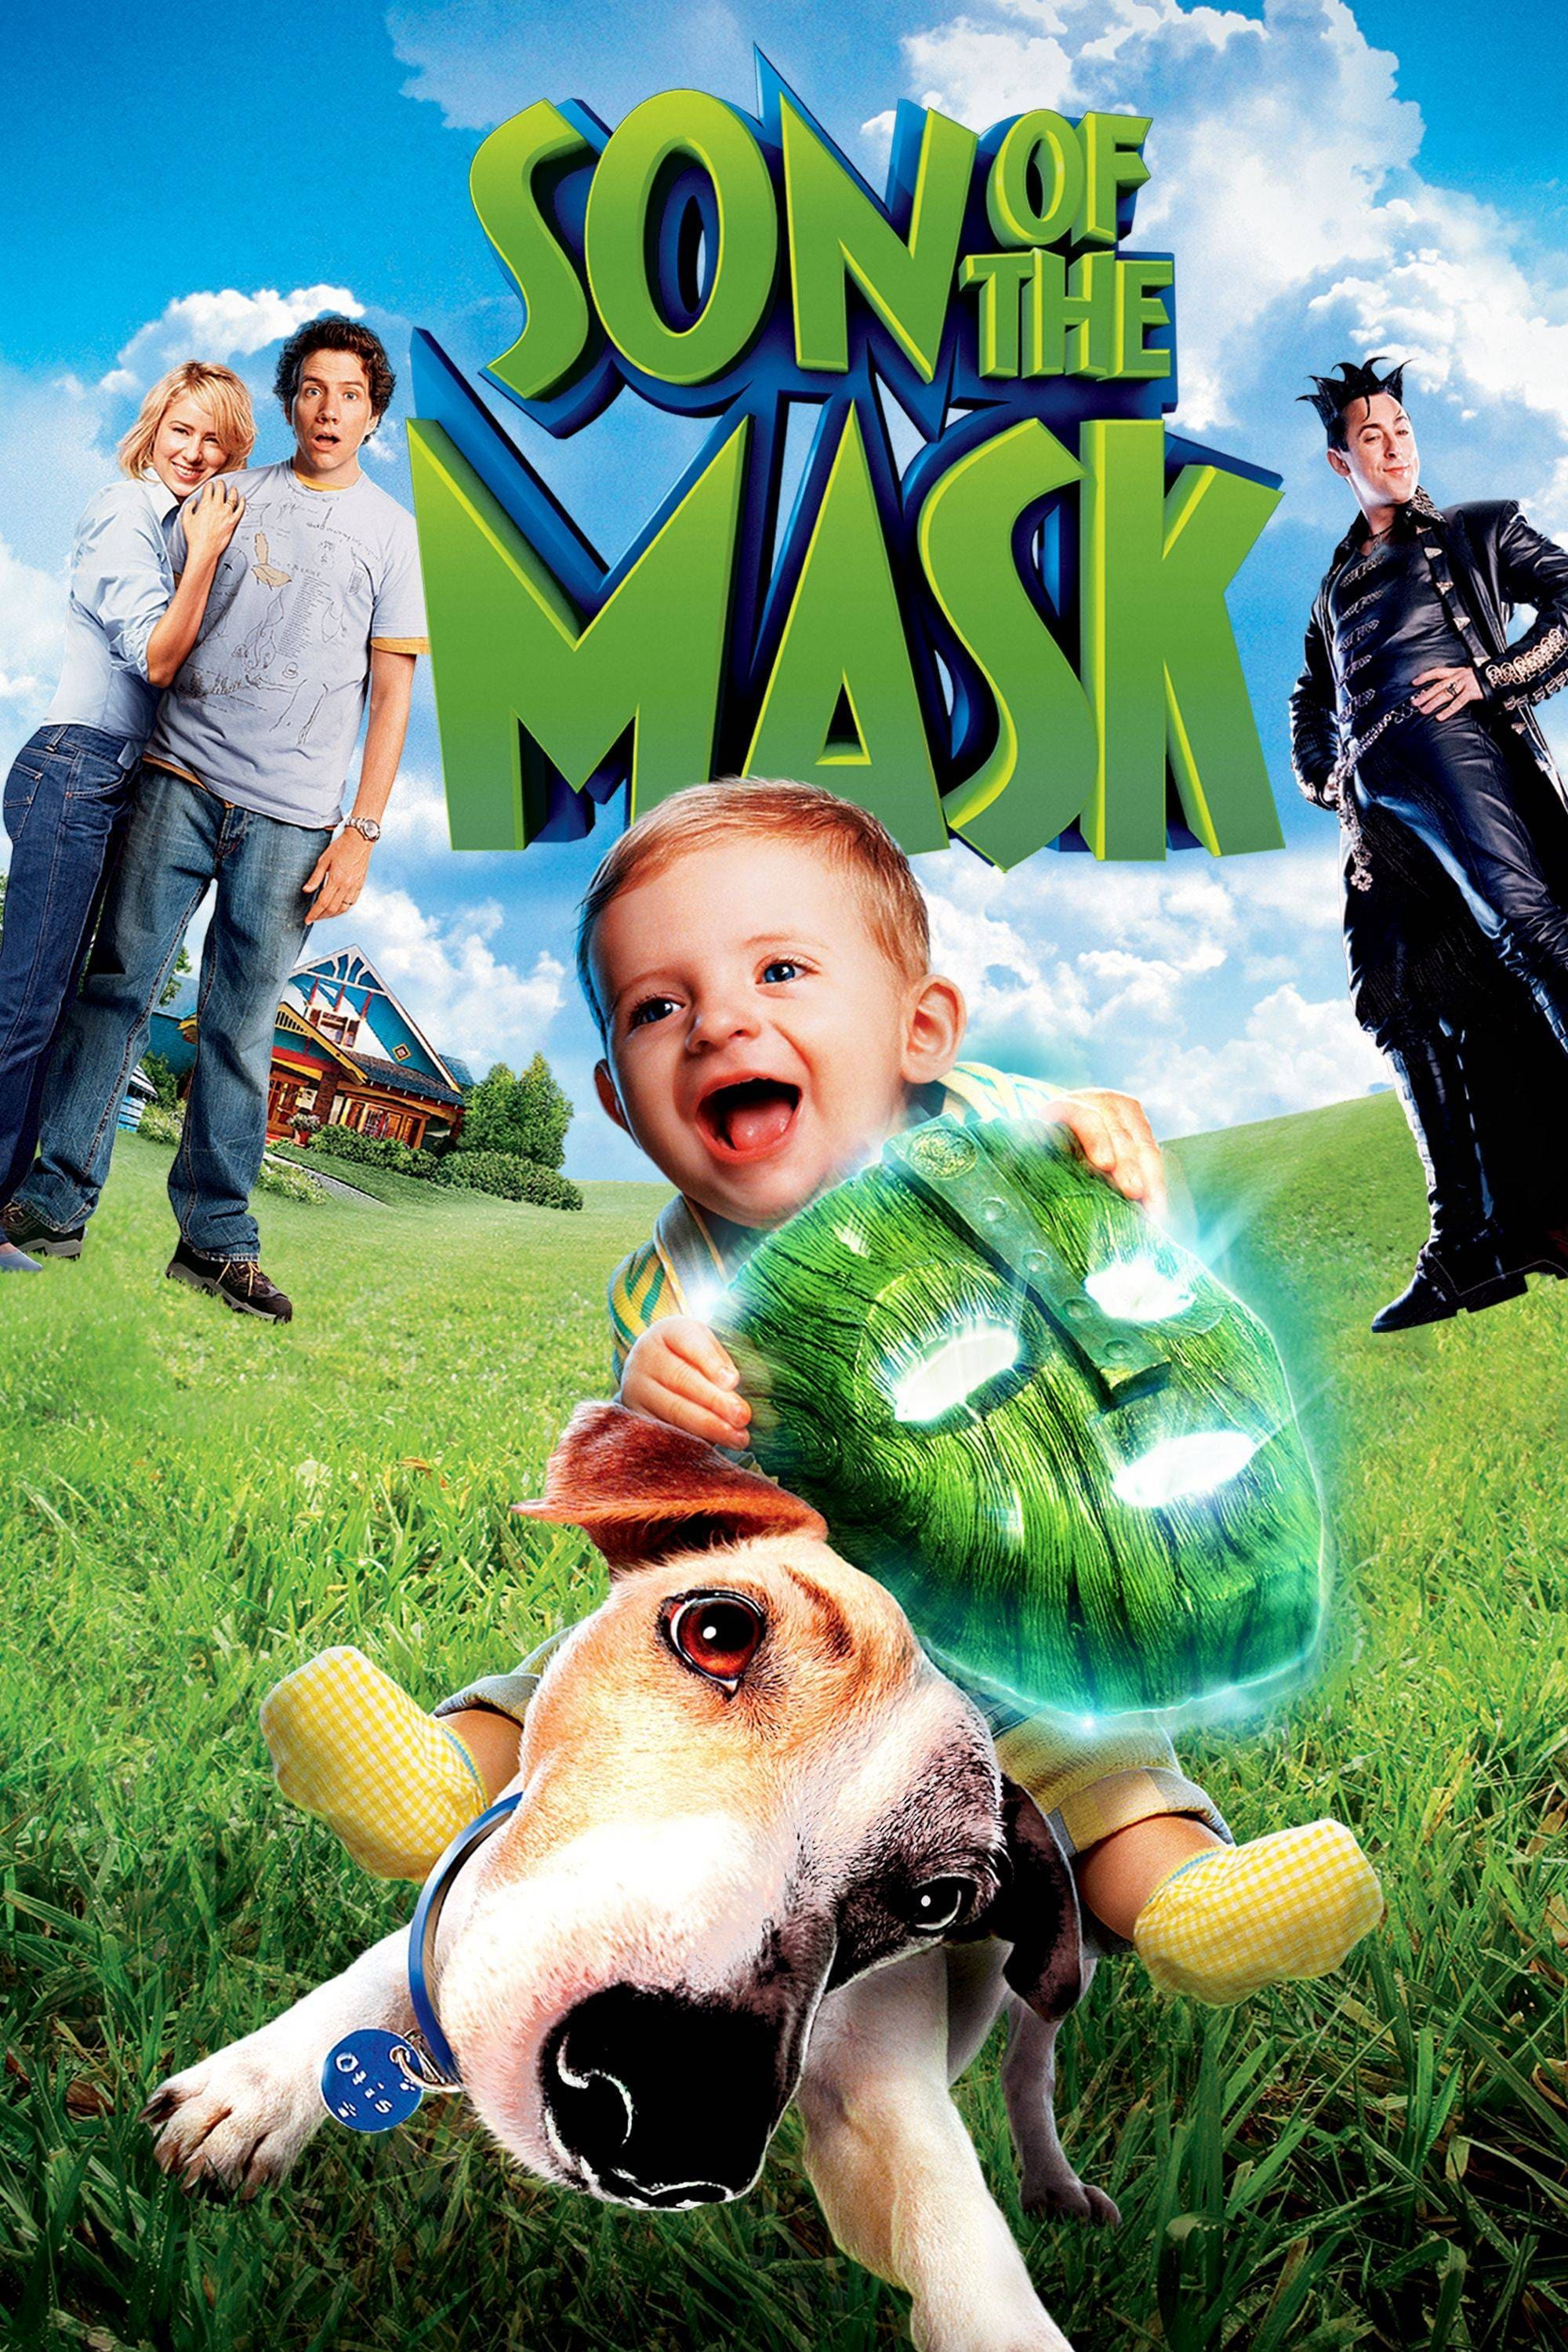 Xem Phim Đứa Con Của Mặt Nạ (Son of the Mask)